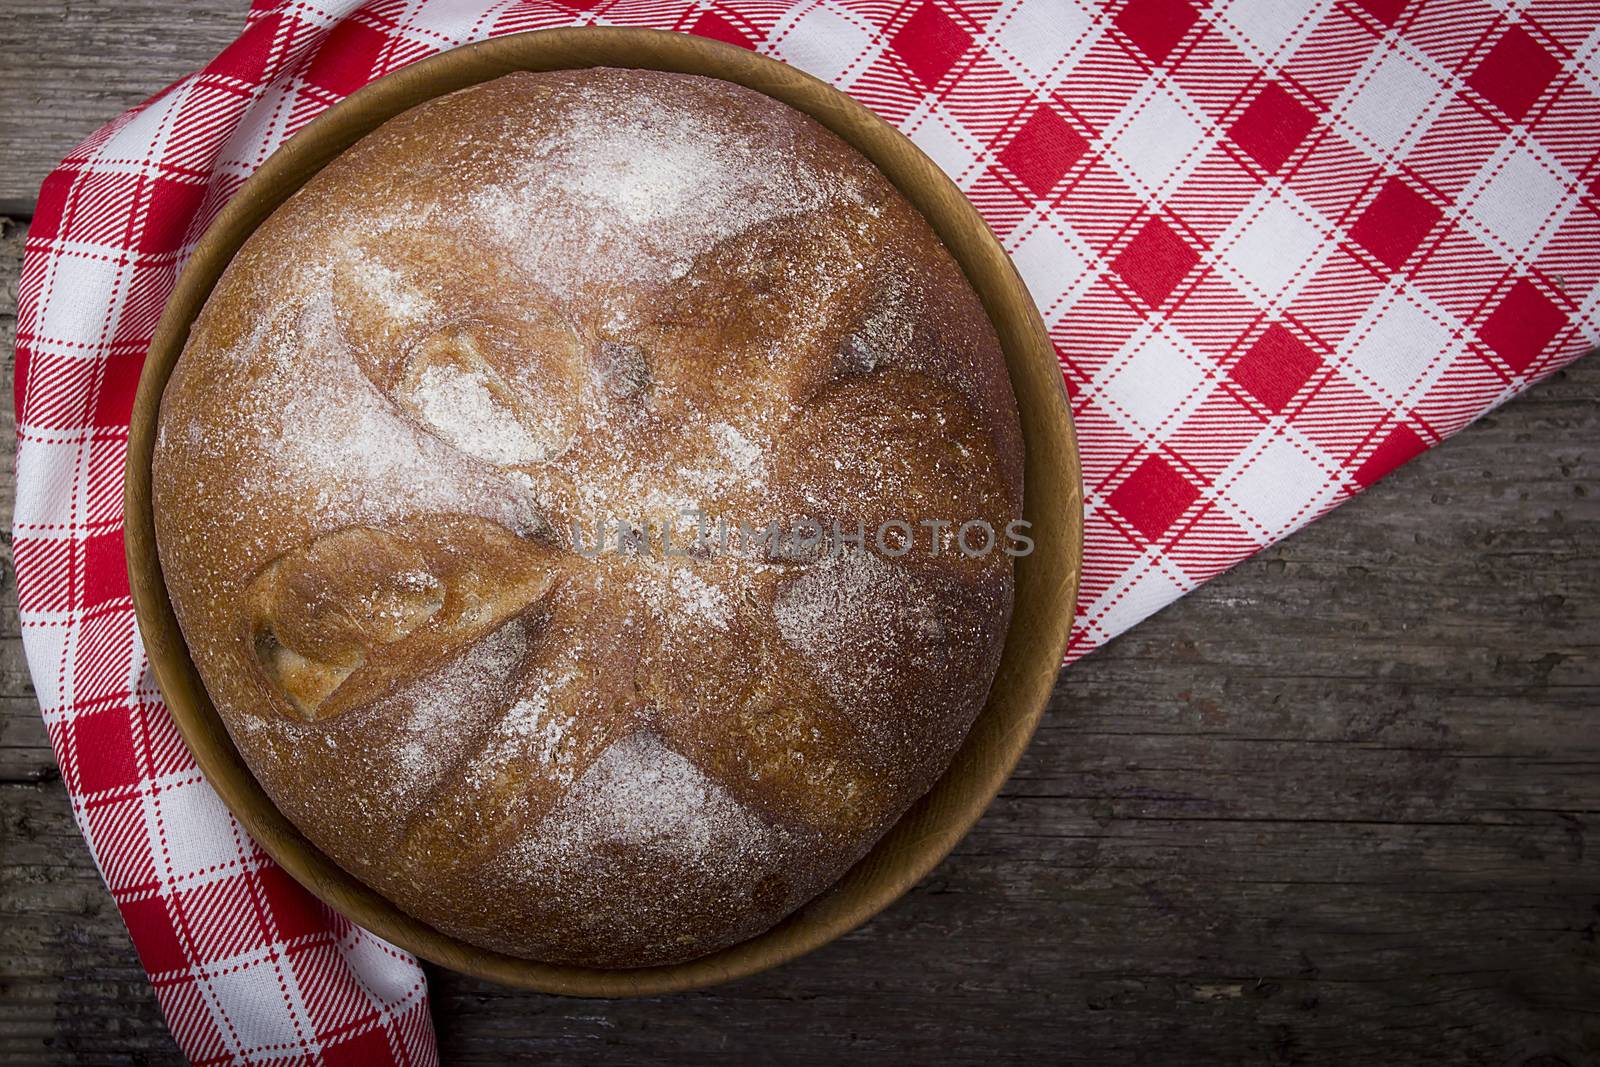 Plate with a loaf of bread on a table of old wood